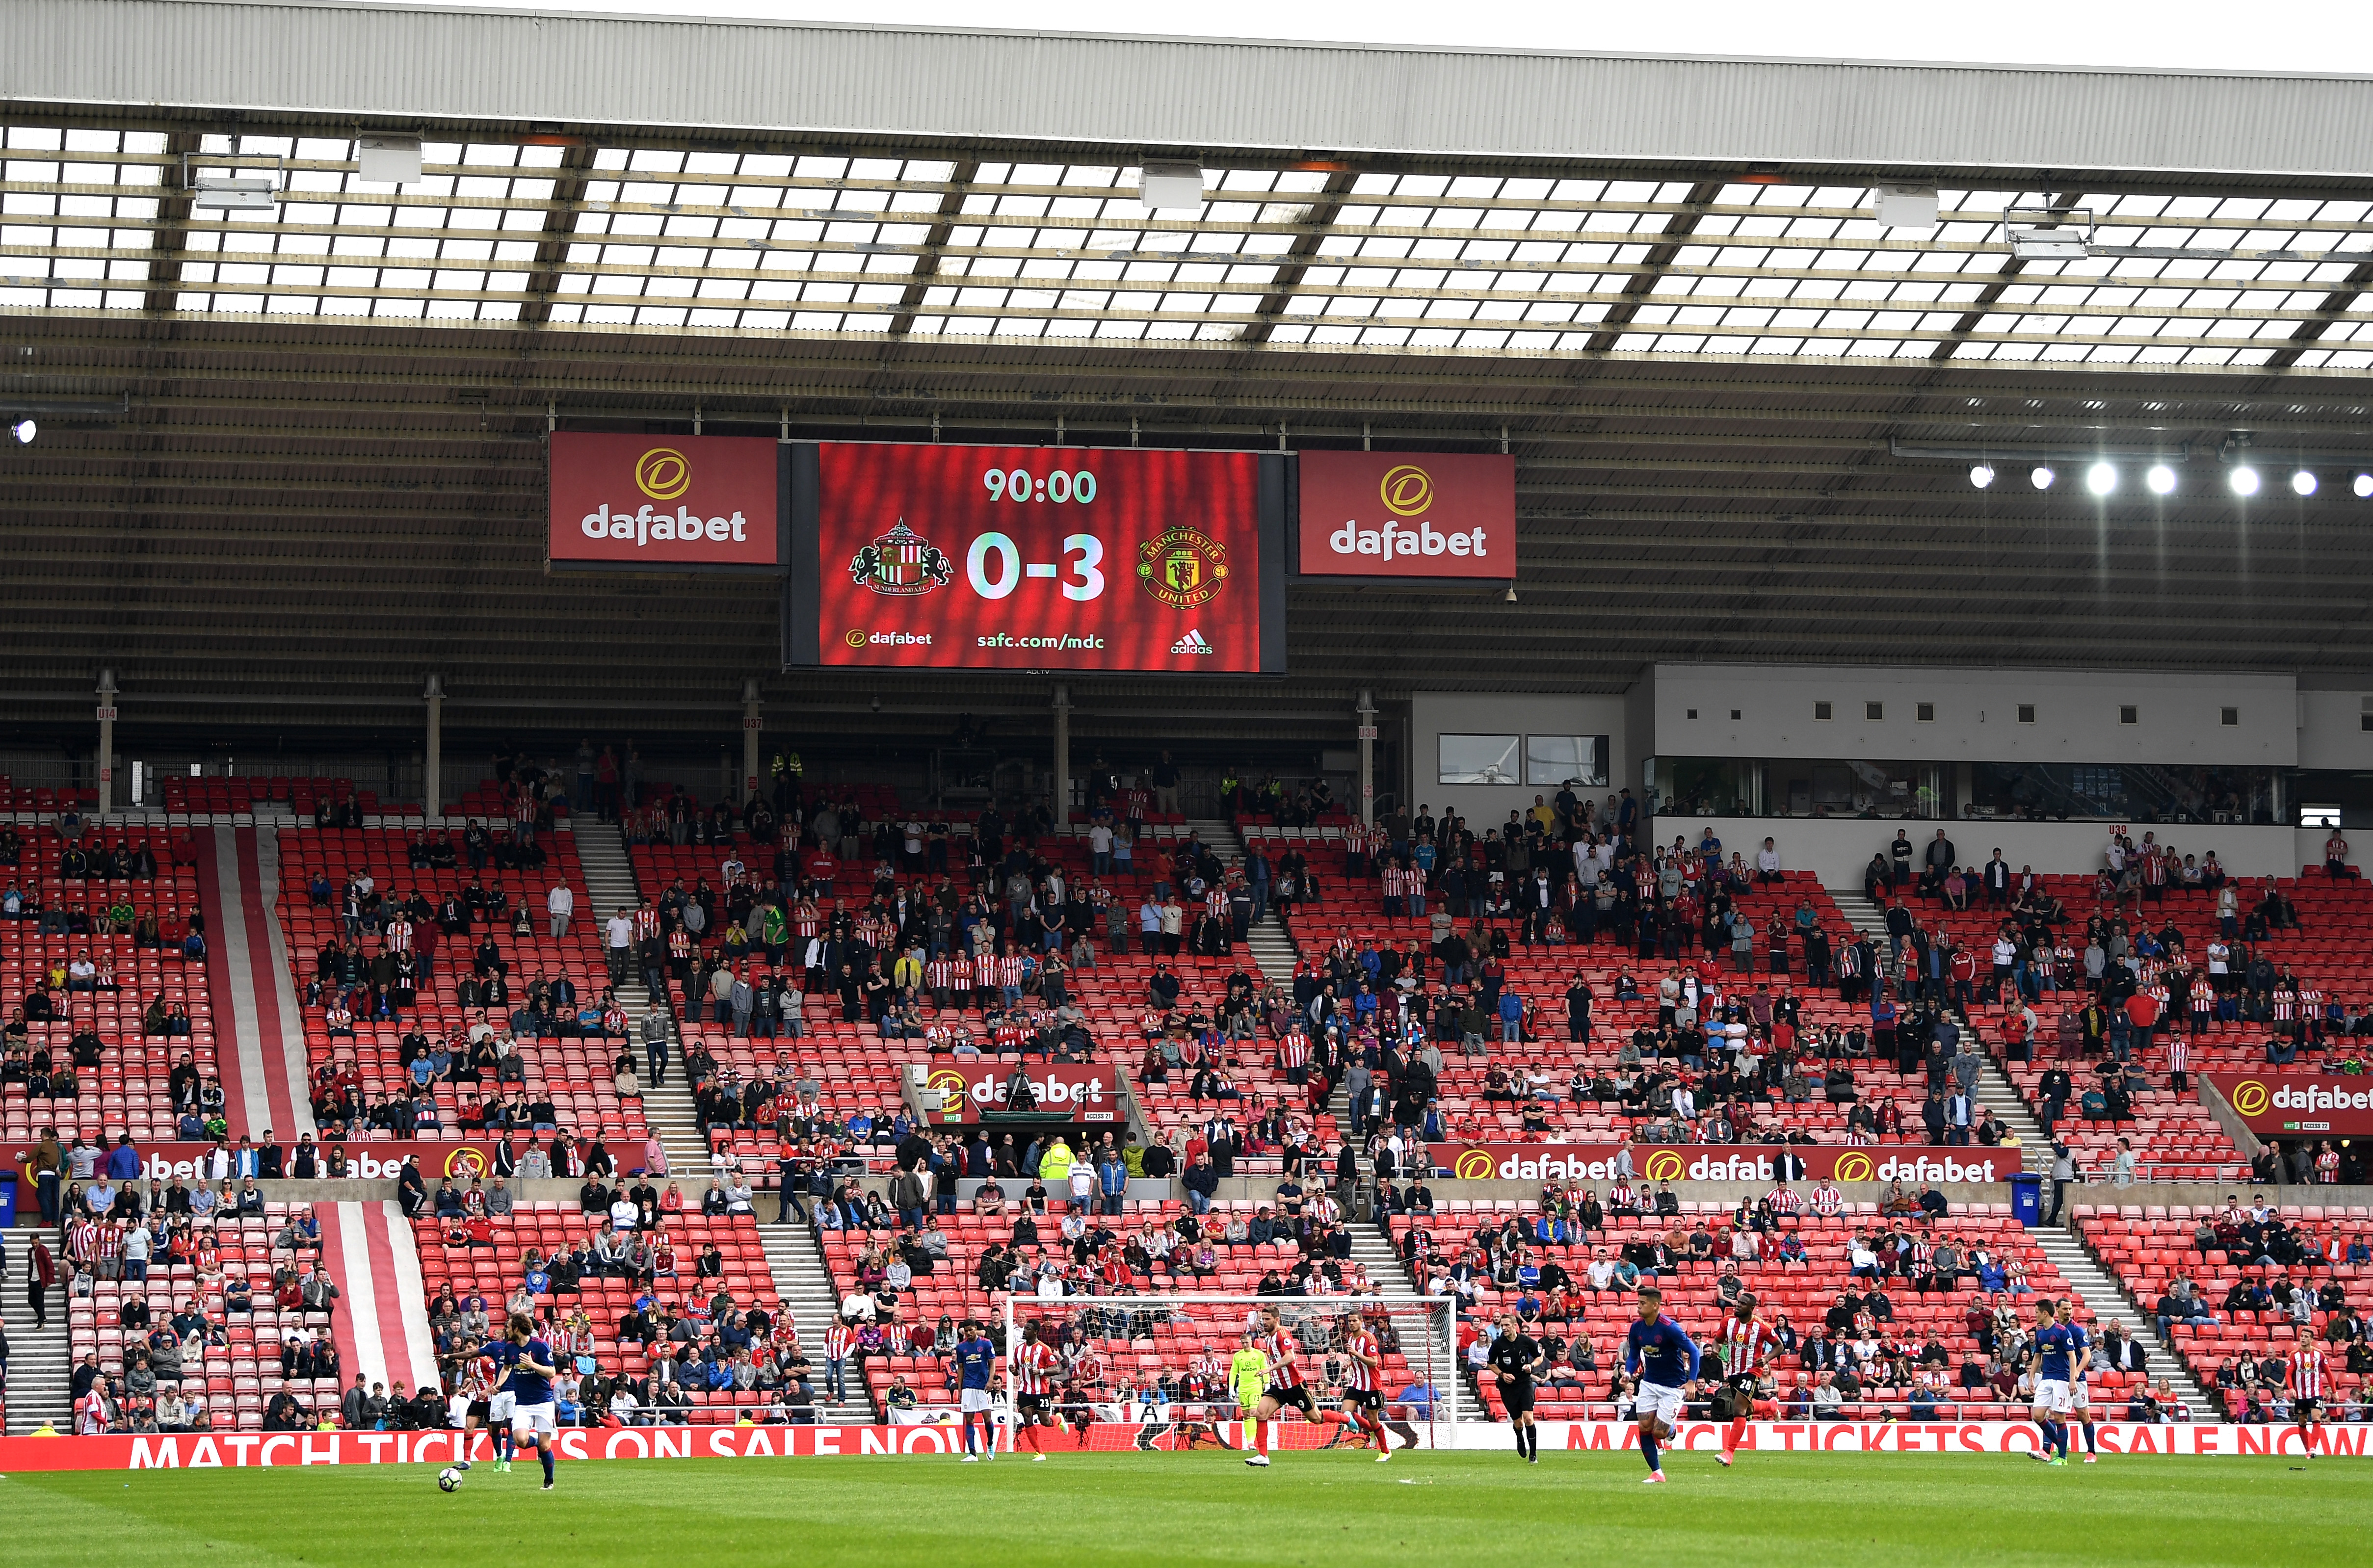 SUNDERLAND, ENGLAND - APRIL 09: A general view showing the final score and empty seats during the Premier League match between Sunderland and Manchester United at Stadium of Light on April 9, 2017 in Sunderland, England.  (Photo by Shaun Botterill/Getty Images)